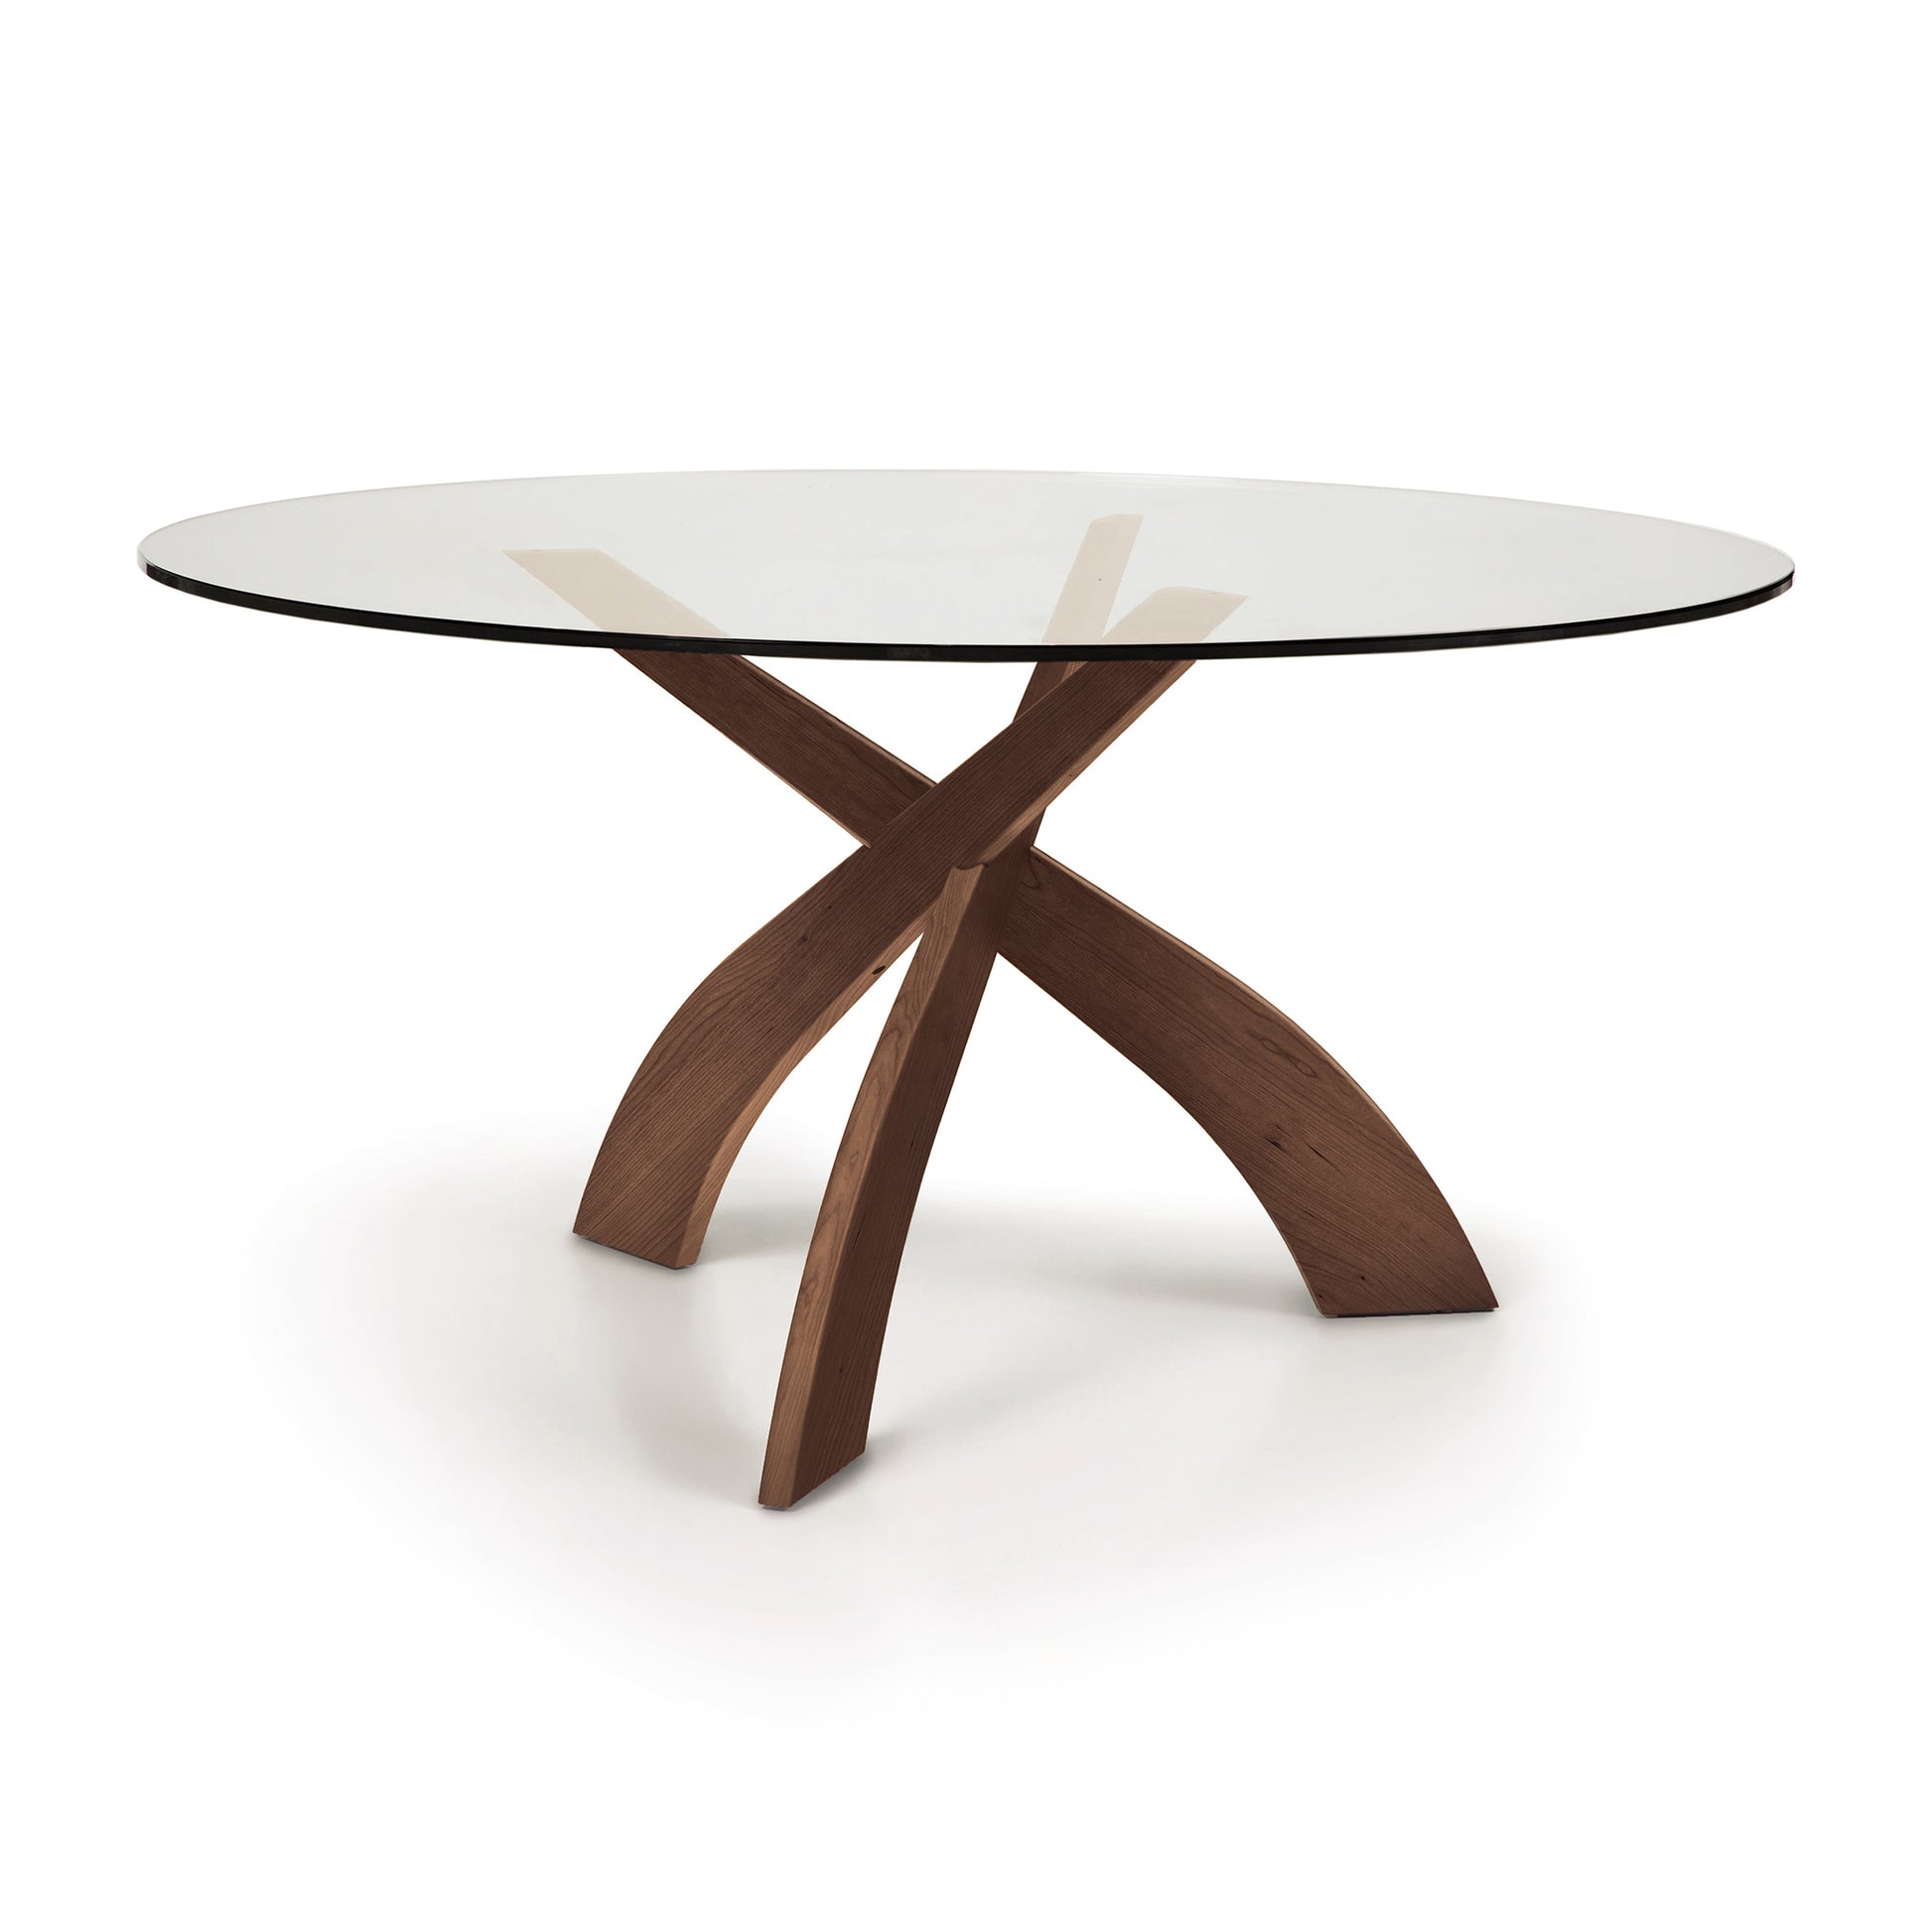 A Entwine Round Glass Top Dining Table, from Copeland Furniture, supported by a sustainably sourced cherry wood cross-shaped base, isolated on a white background.